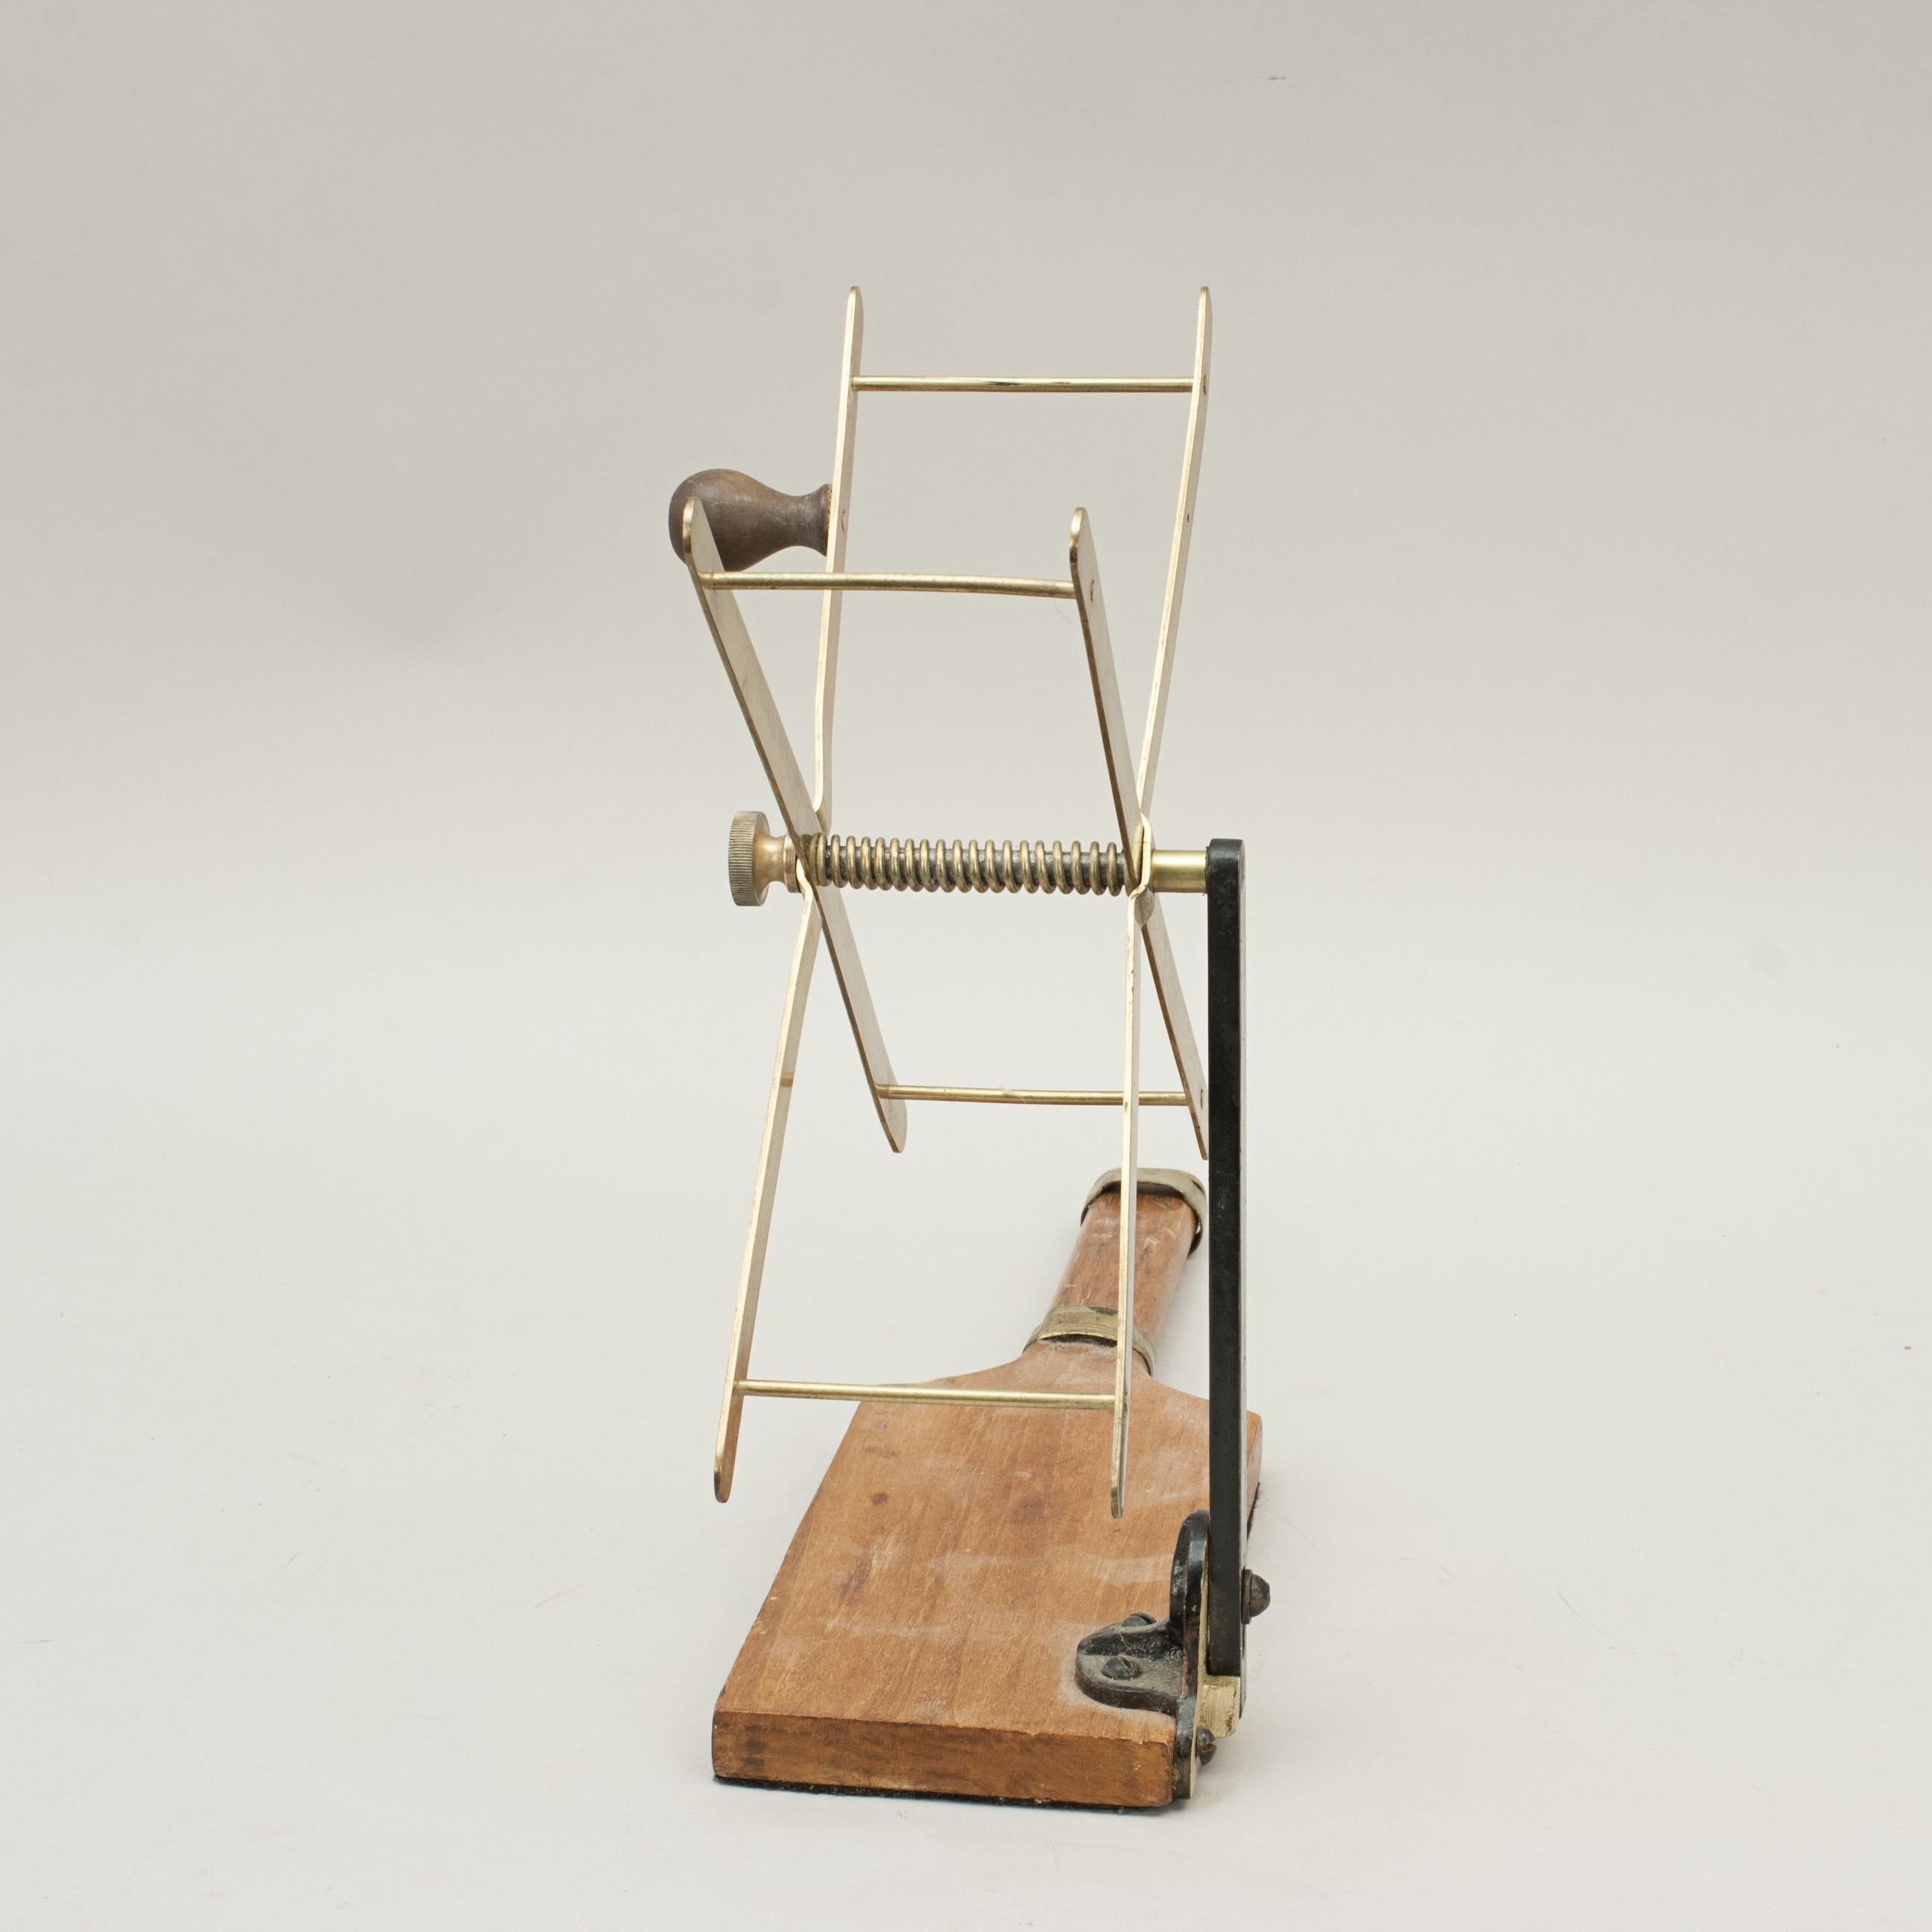 Early 20th Century Vintage Fishing Line Drier / Winder by Farlow, London